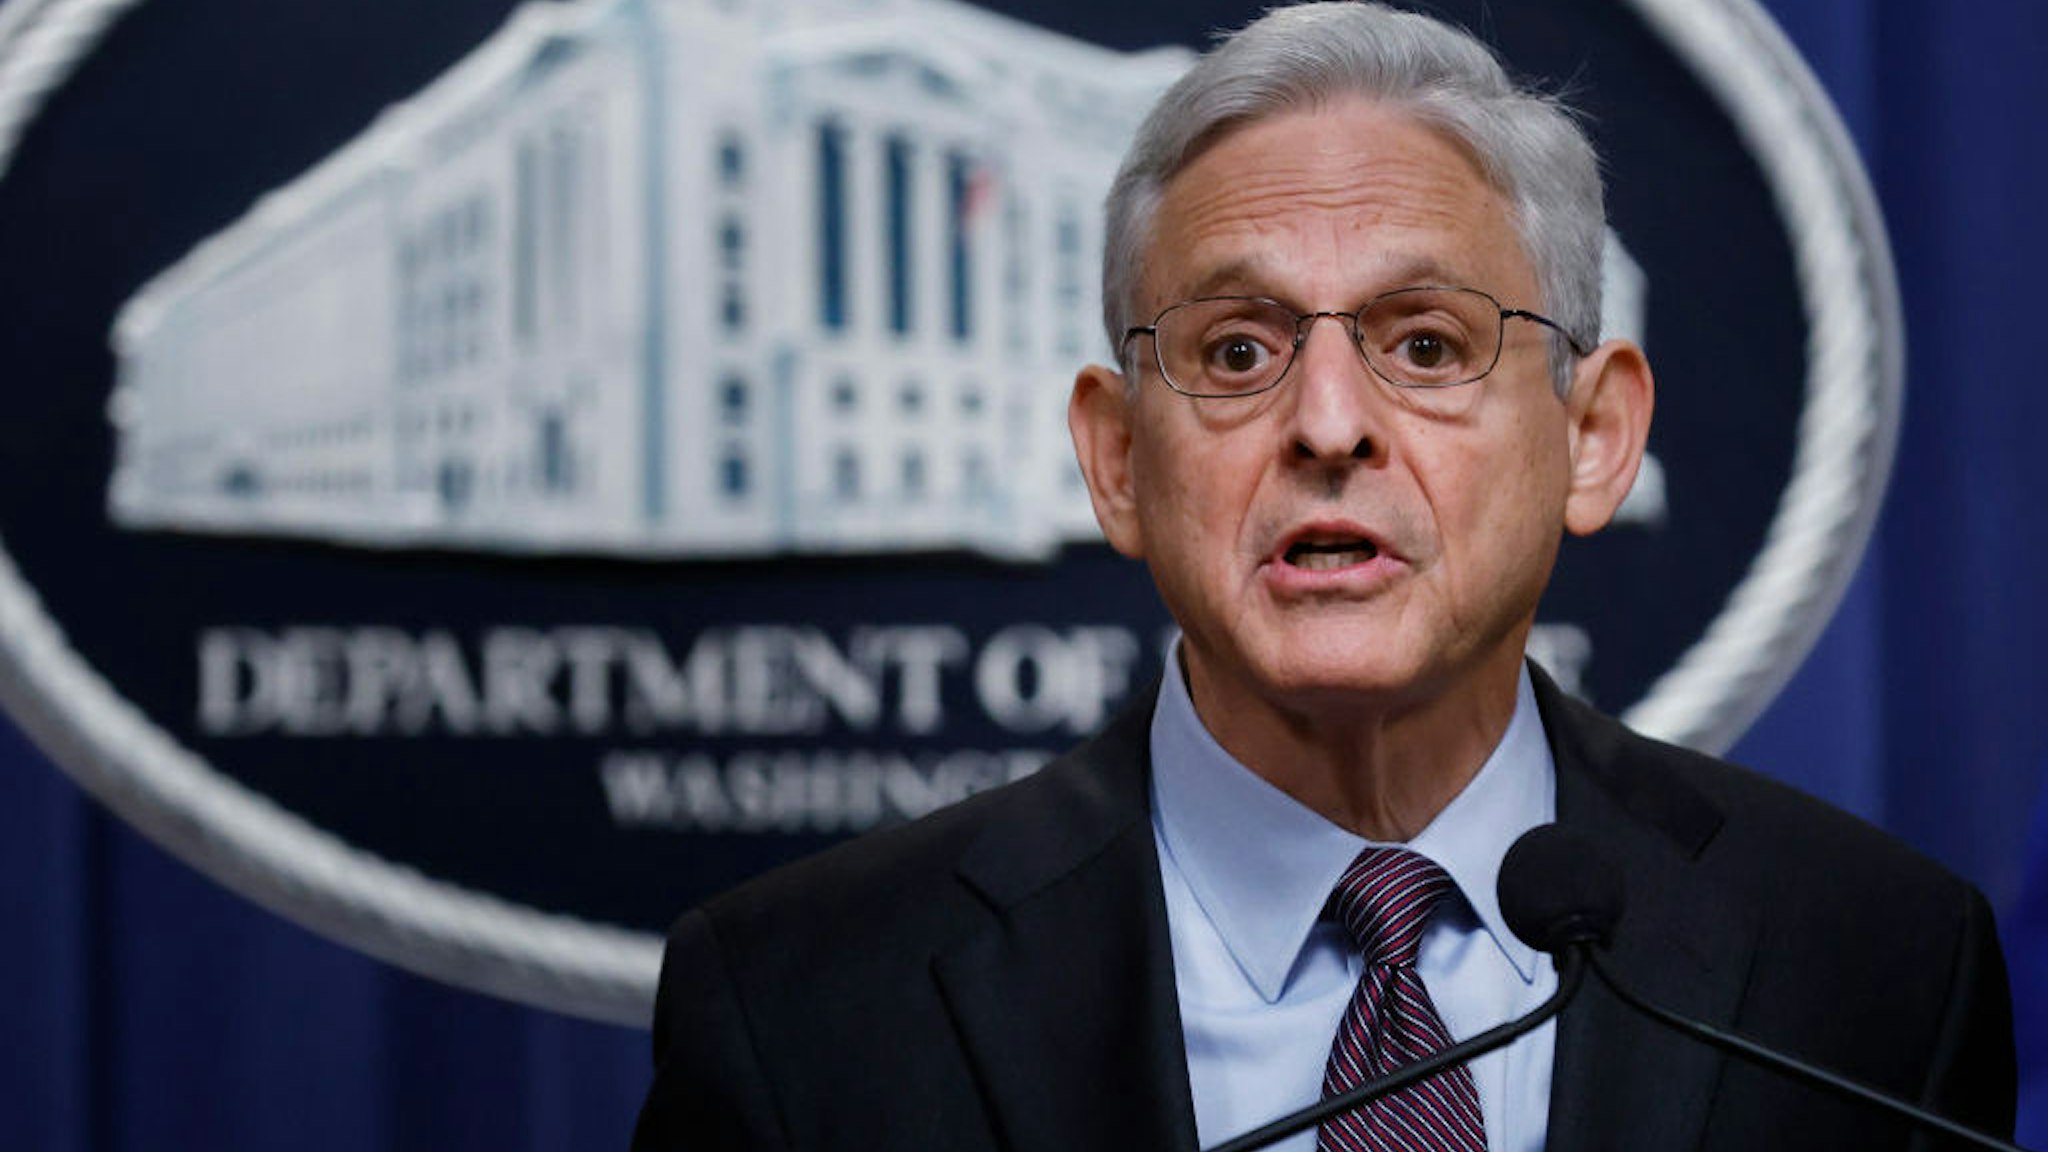 WASHINGTON, DC - MAY 24: U.S. Attorney General Merrick Garland announces the resolution of a foreign-bribery investigation with Glencore International AG, an Anglo-Swiss commodities company, during a news conference at the Department of Justice's Robert F. Kennedy Building on May 24, 2022 in Washington, DC. Glencore will pay pay at least $1.2 billion to settle U.S. criminal and civil investigations into manipulation of fuel-oil prices among other penalties in the UK and Brazil. (Photo by Chip Somodevilla/Getty Images)